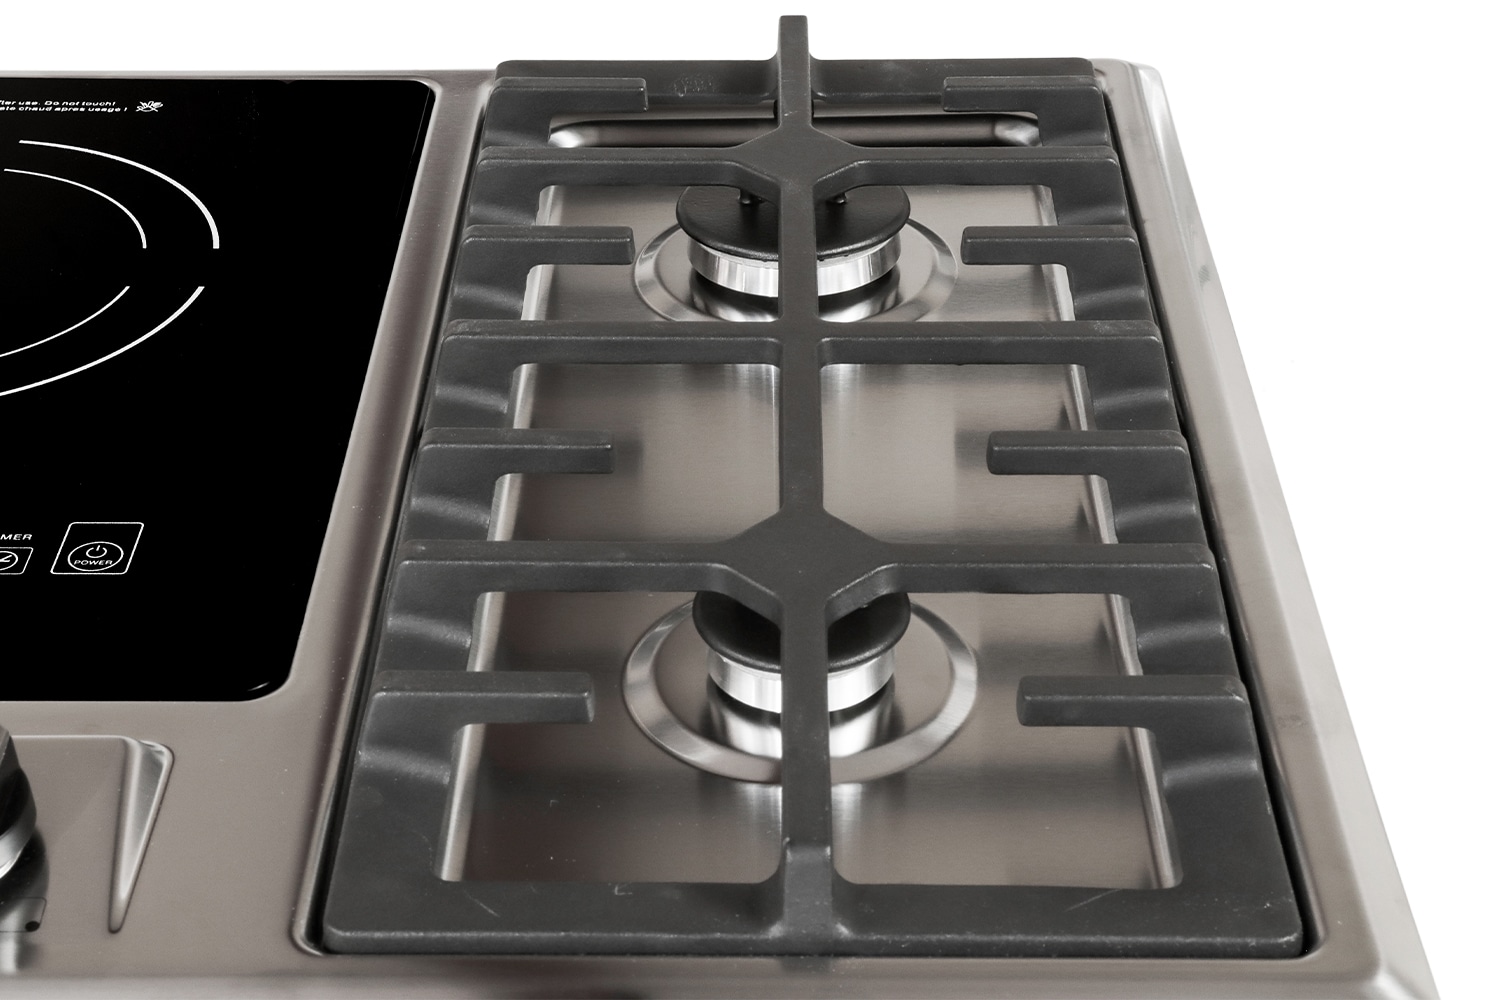 Induction Cooktops by True Induction